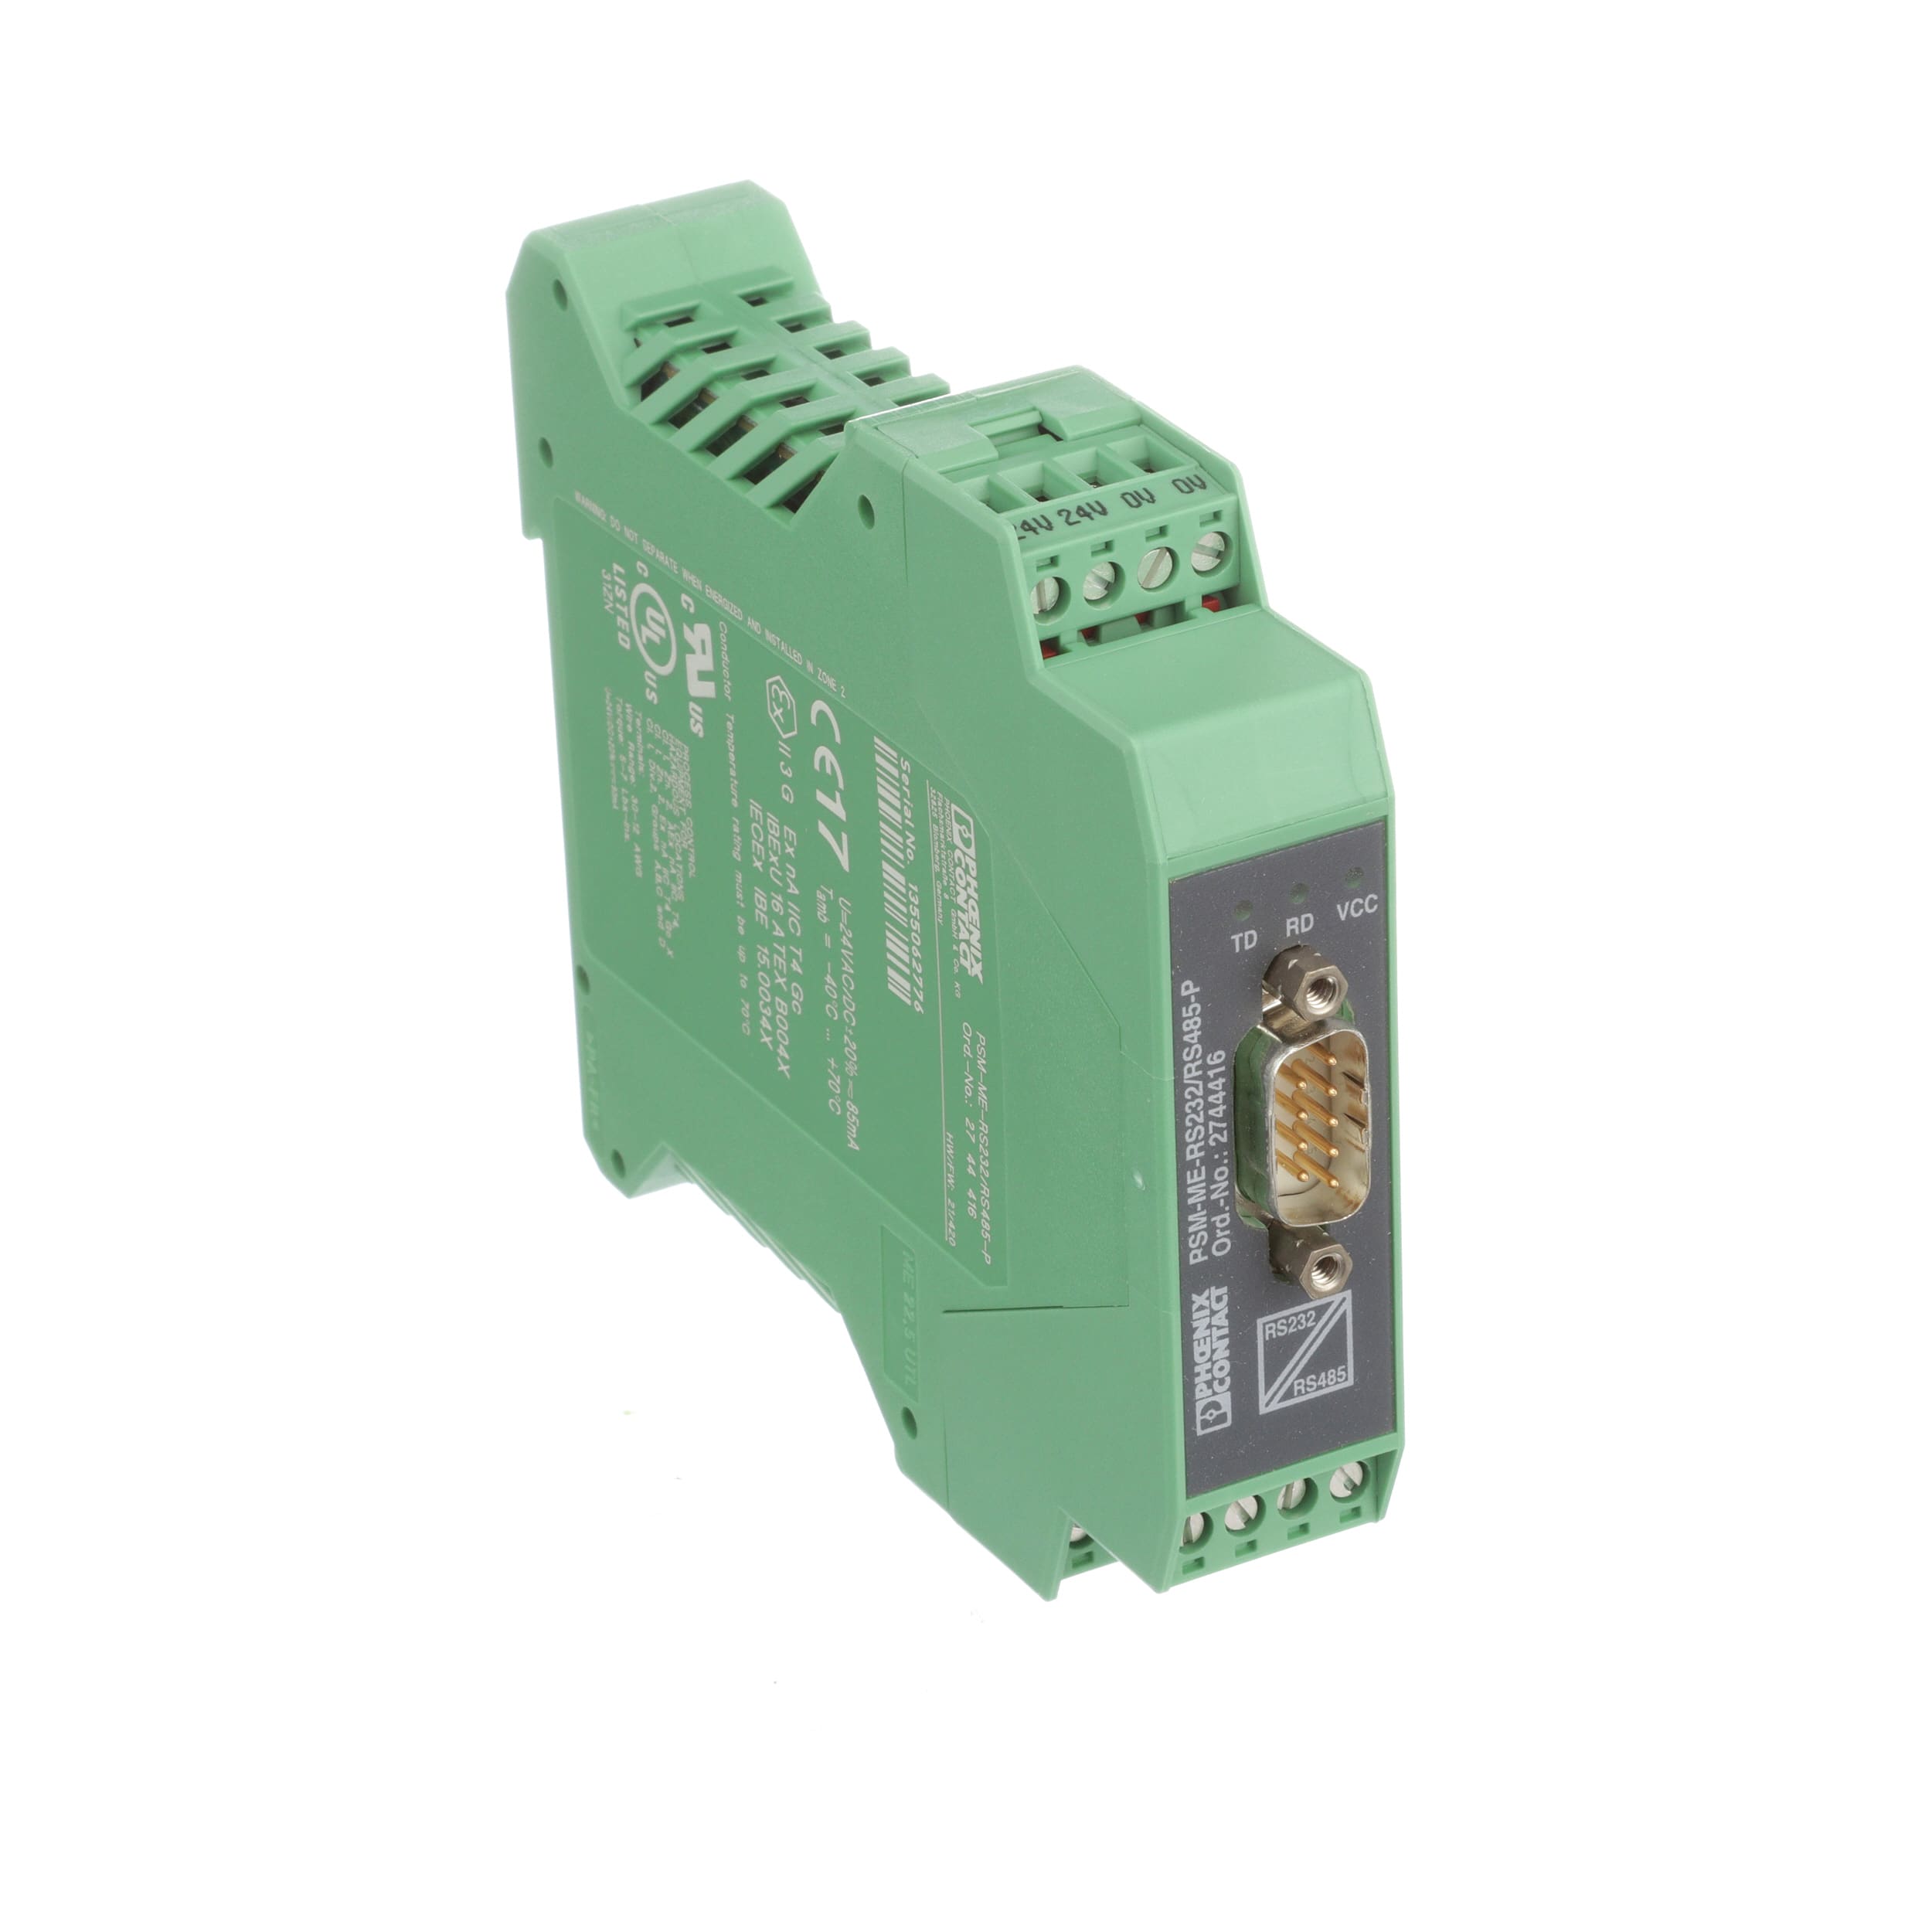 Phoenix Contact PSM-ME-RS232/RS485-P din rail RS485 to RS232 convertor 